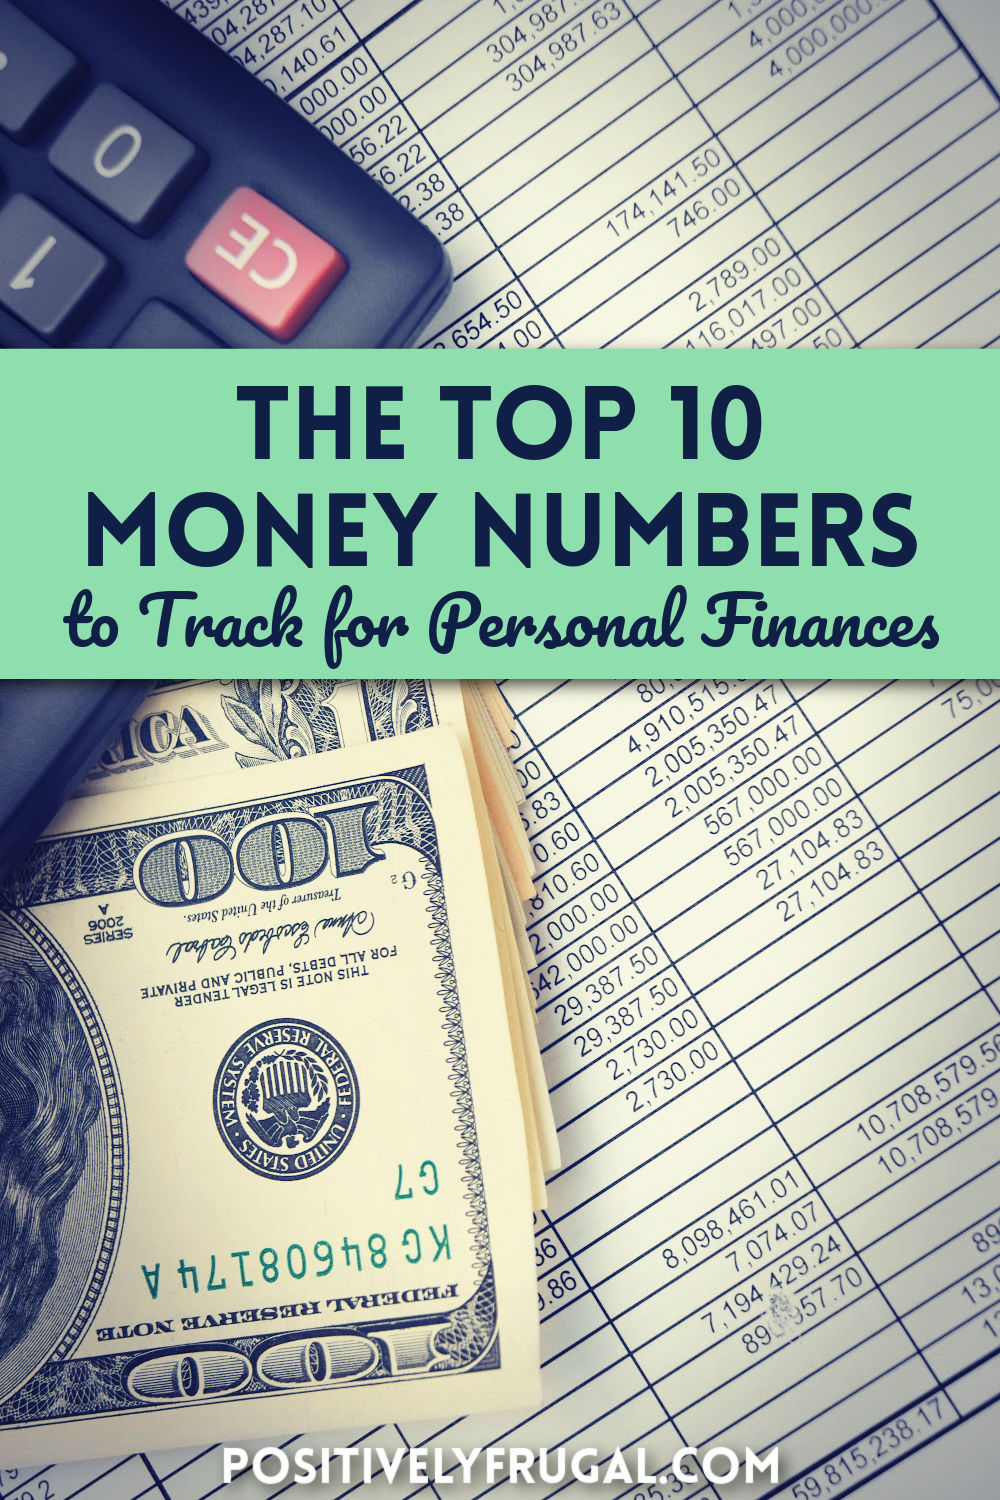 Top 10 Money Numbers to Track for Personal Finances by PositivelyFrugal.com